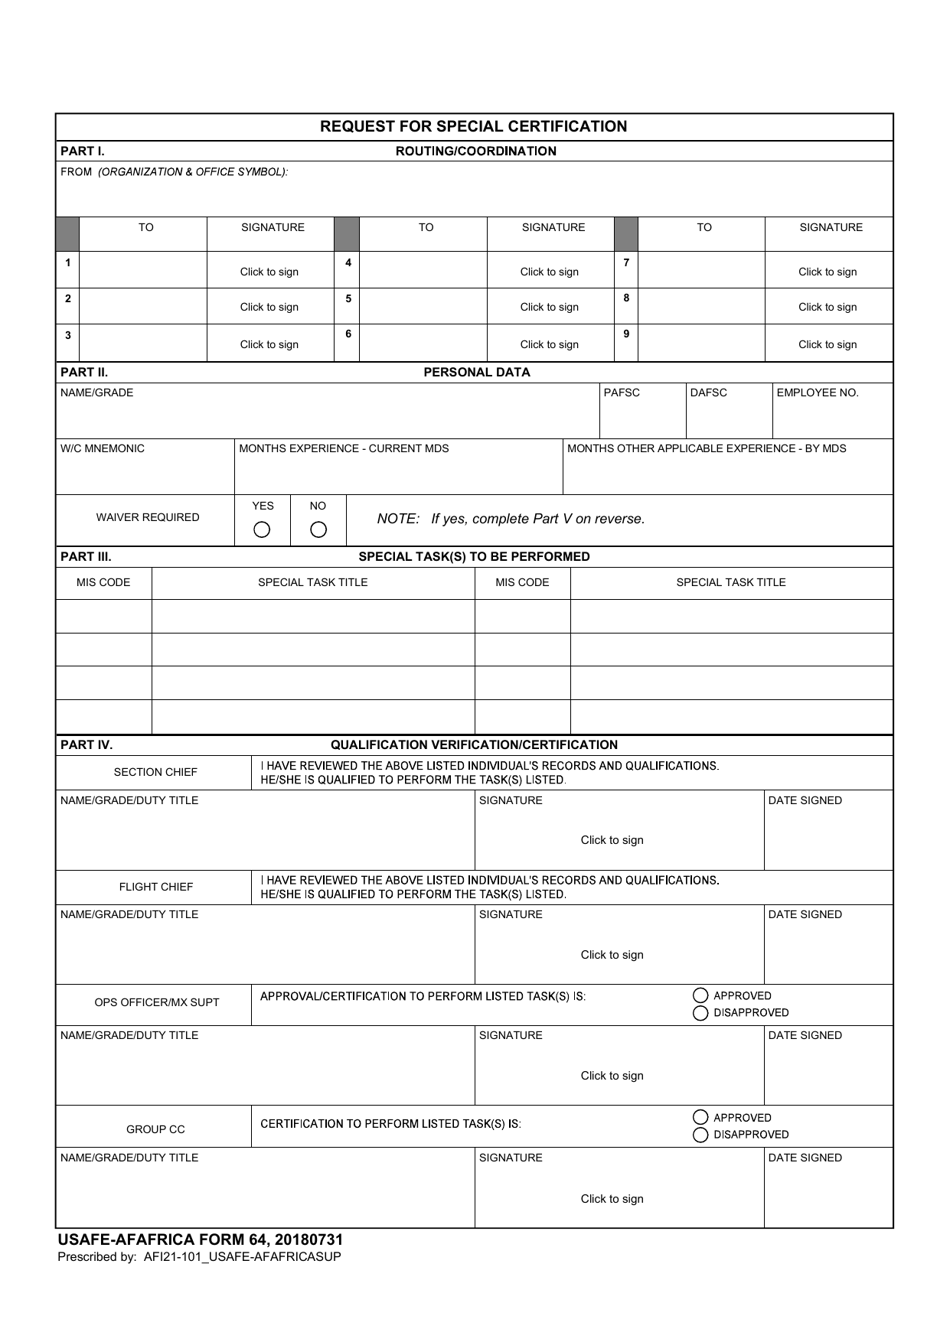 USAFE-AFAFRICA Form 64 Request for Special Certification, Page 1